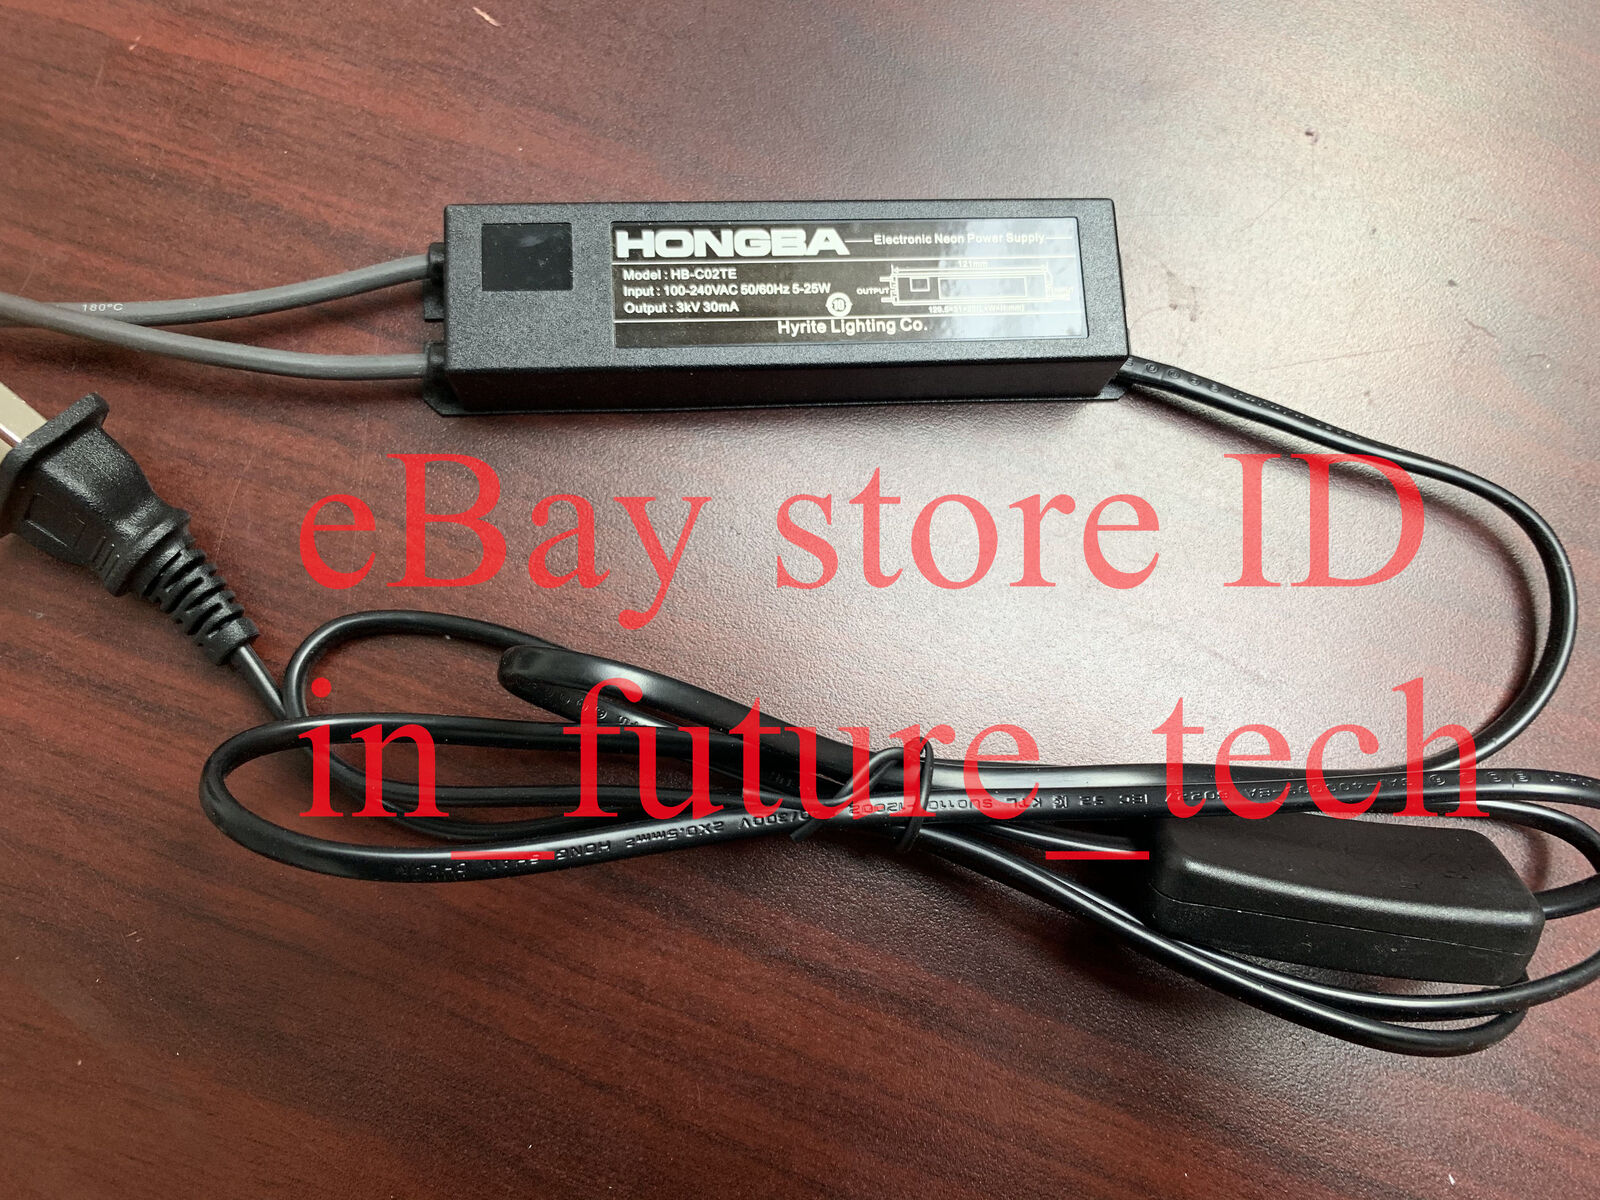 HONGBA 3kV Transformer Neon Sign Electronic Power Supply Rectifier With Switch B